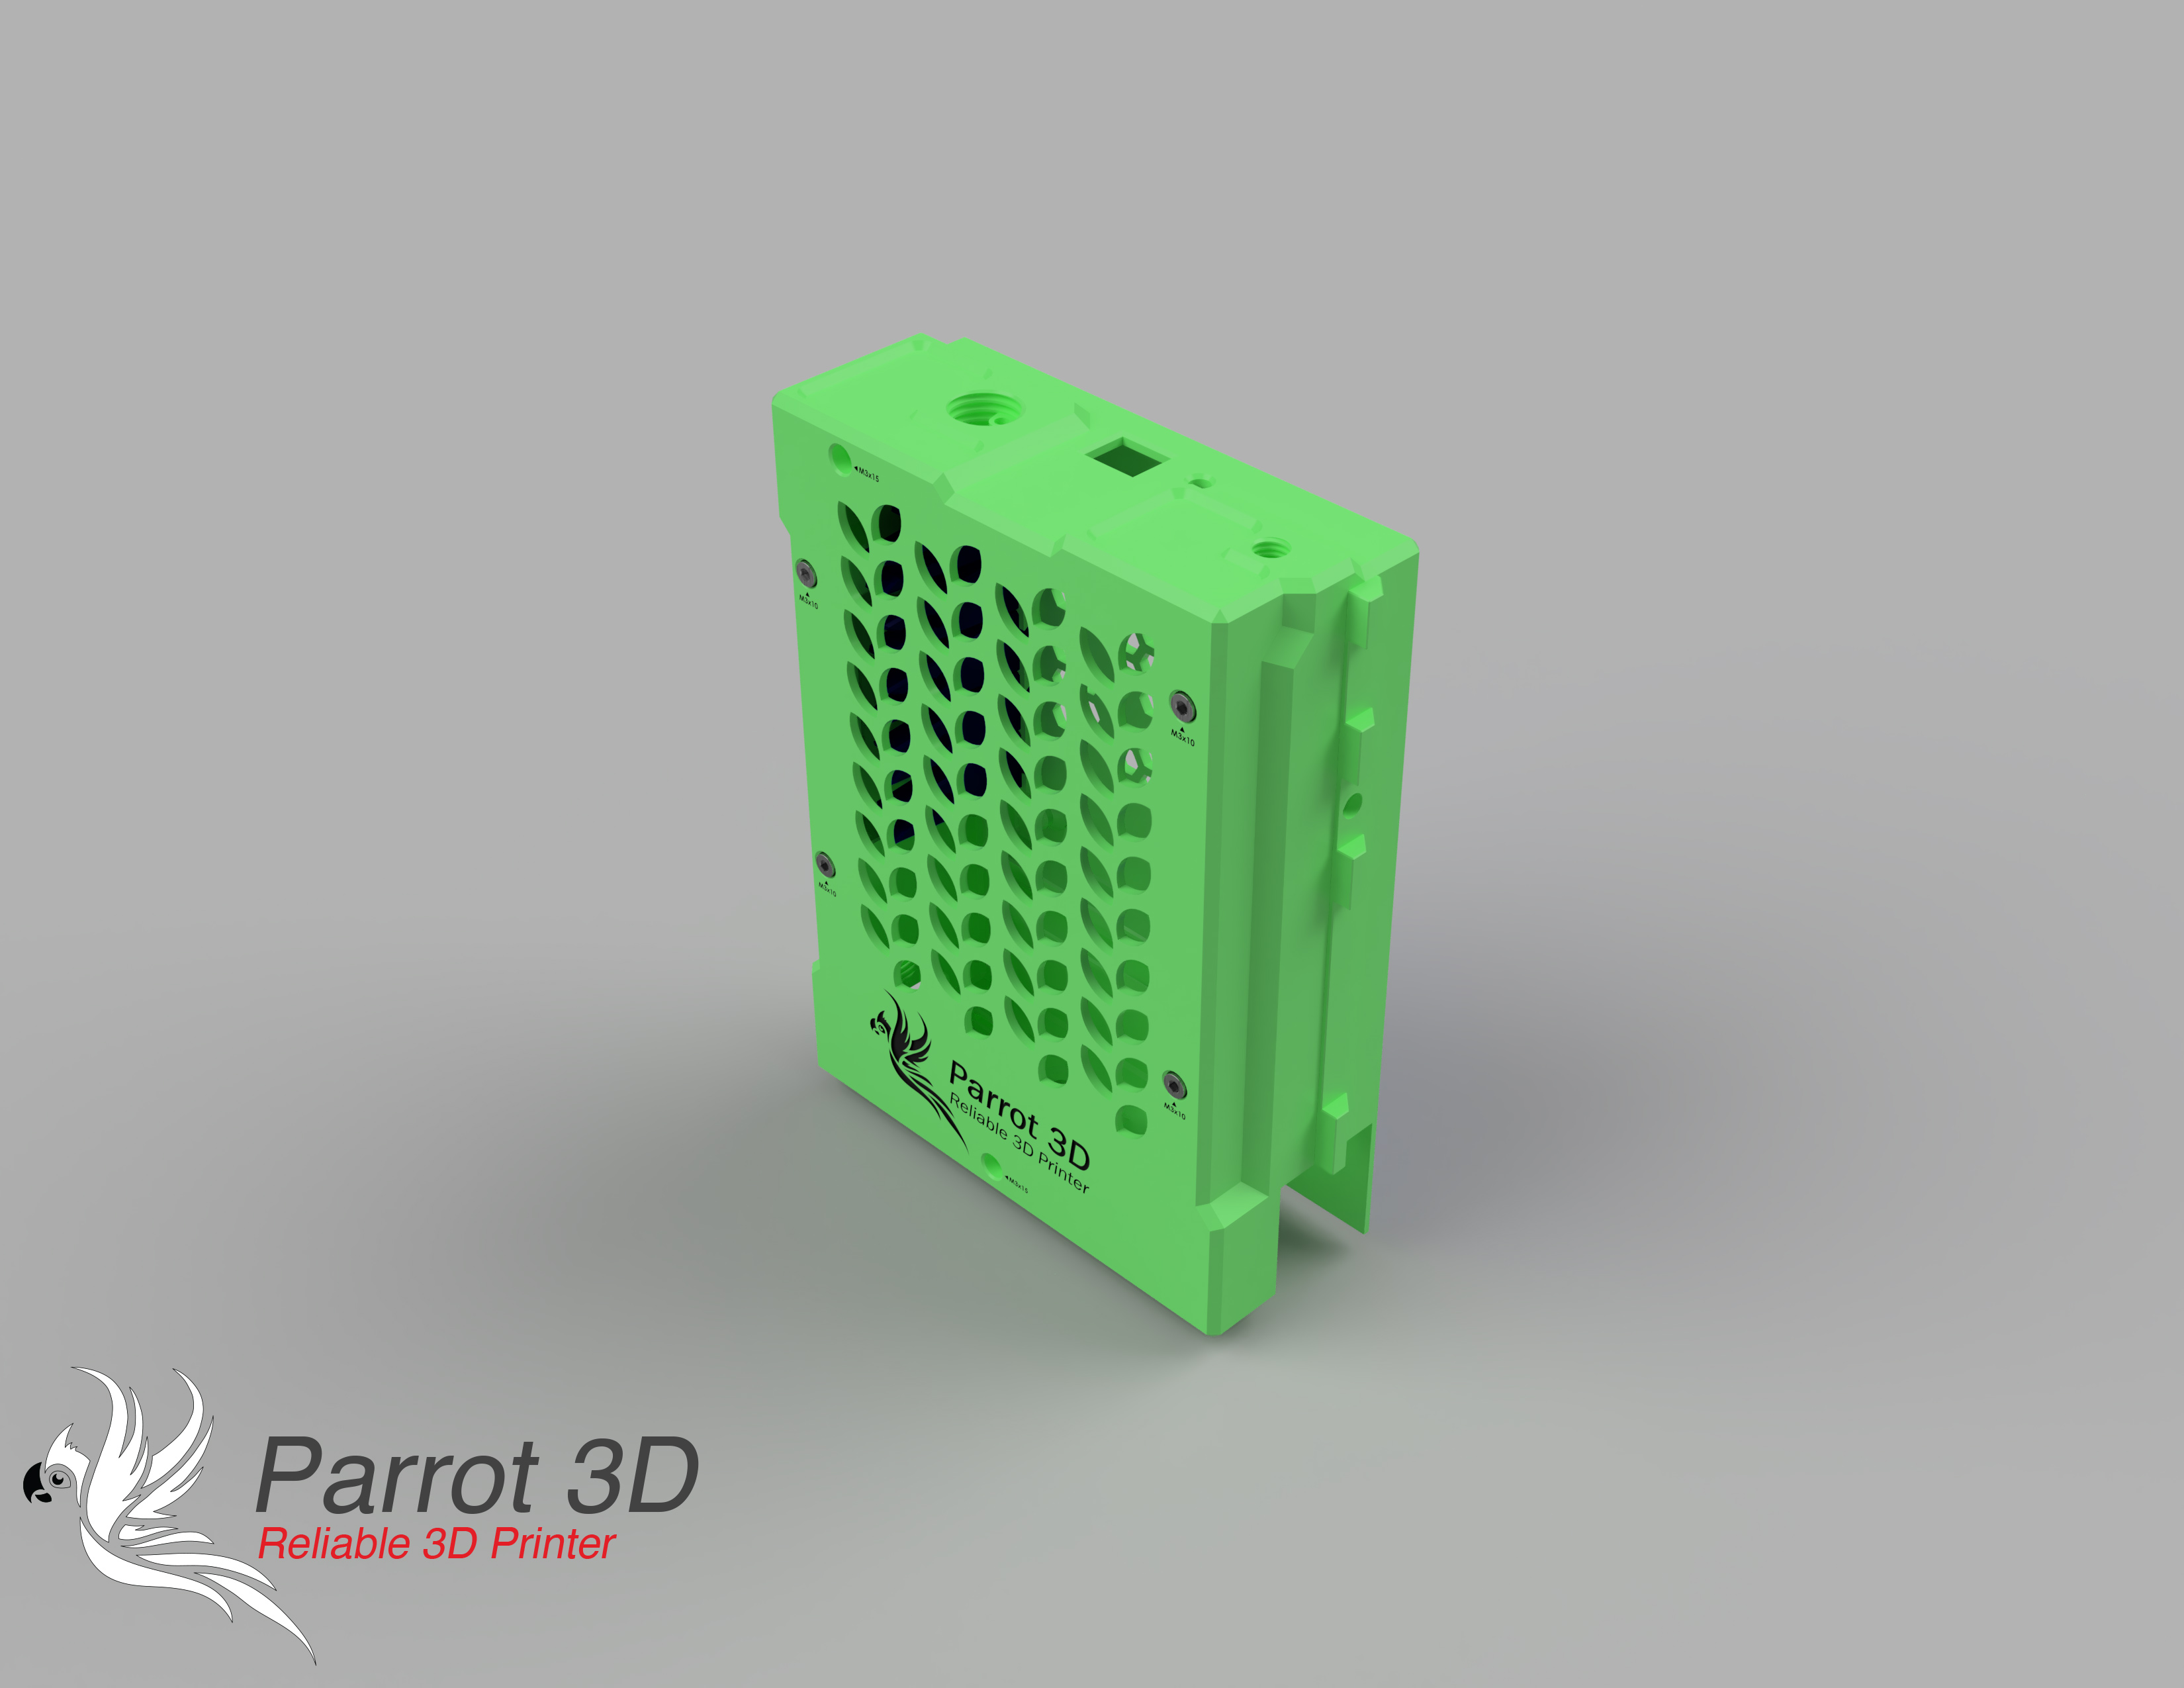 Prusa EINSY ENCLOSURE FOR 3030 FRAME (PARROT 3D)